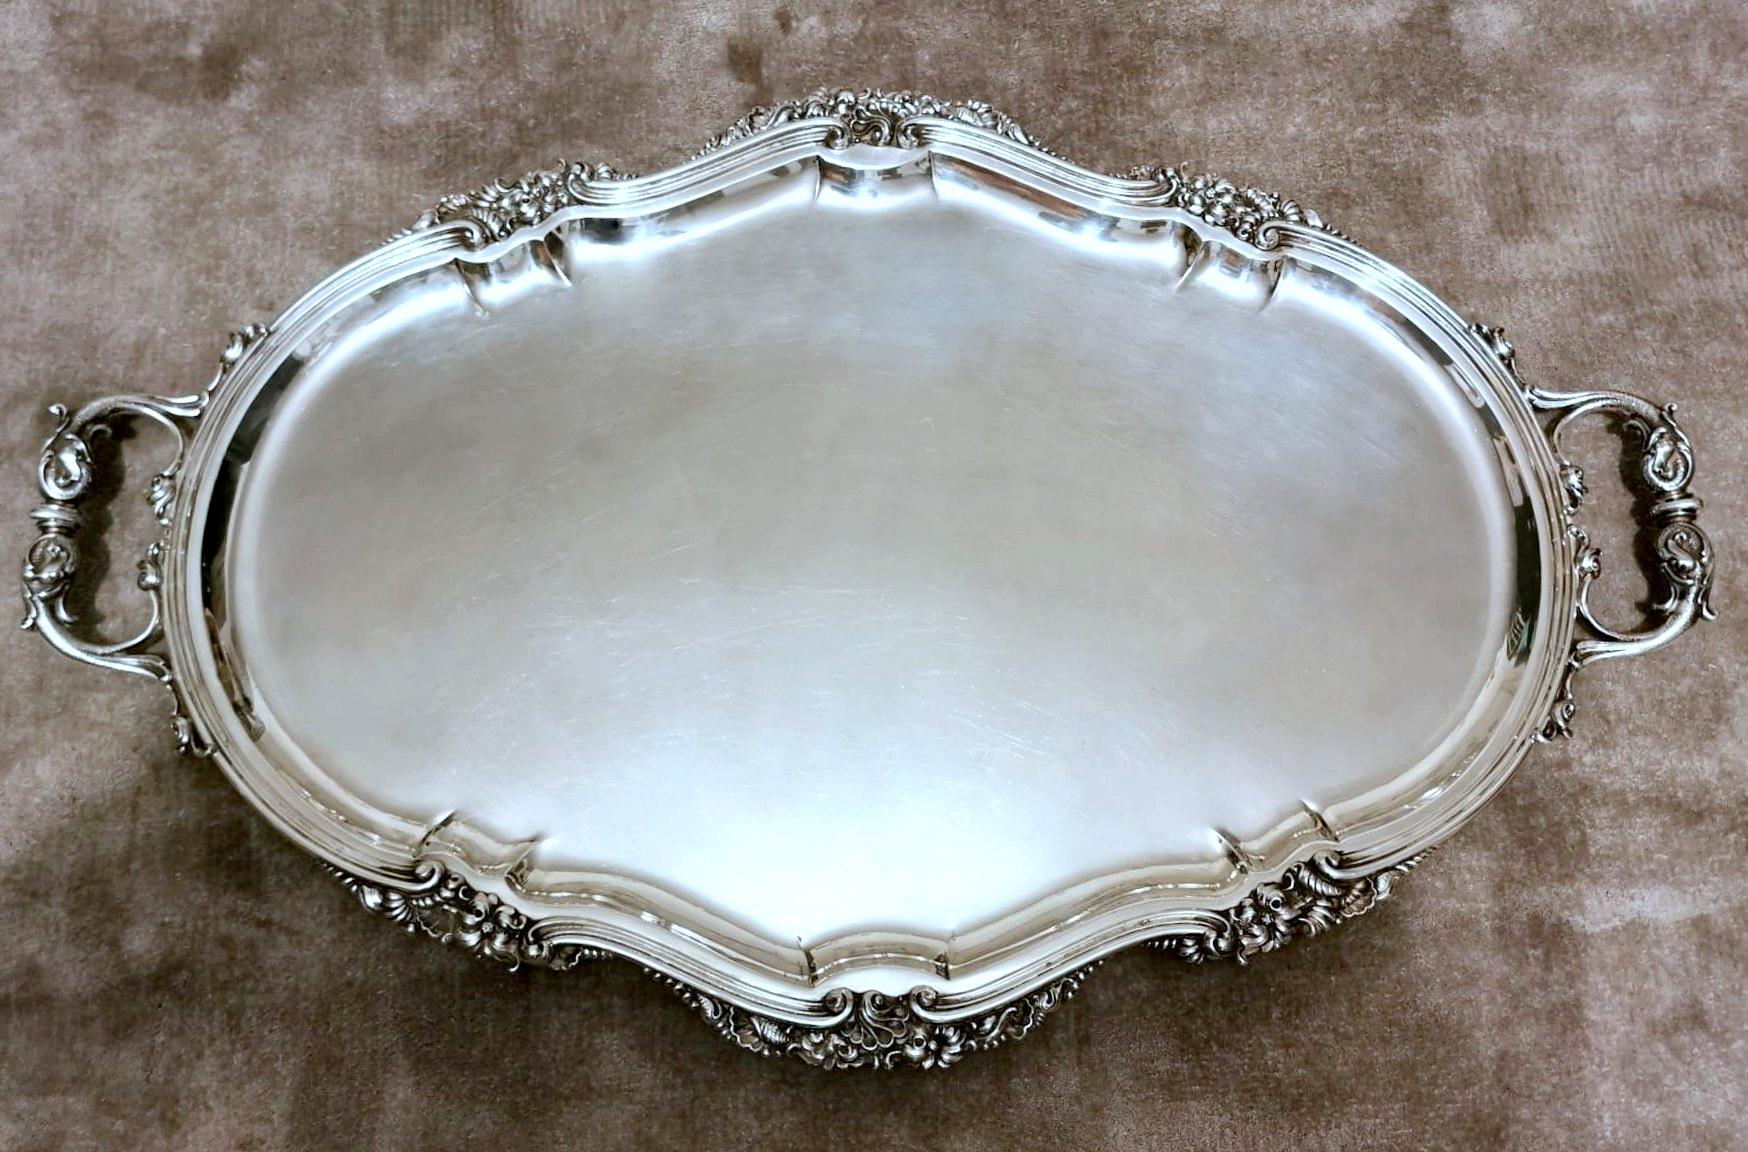 We kindly suggest you read the whole description, because with it we try to give you detailed technical and historical information to guarantee the authenticity of our objects.
Exceptional and massive Italian silver tray titled 800 thousandths; the